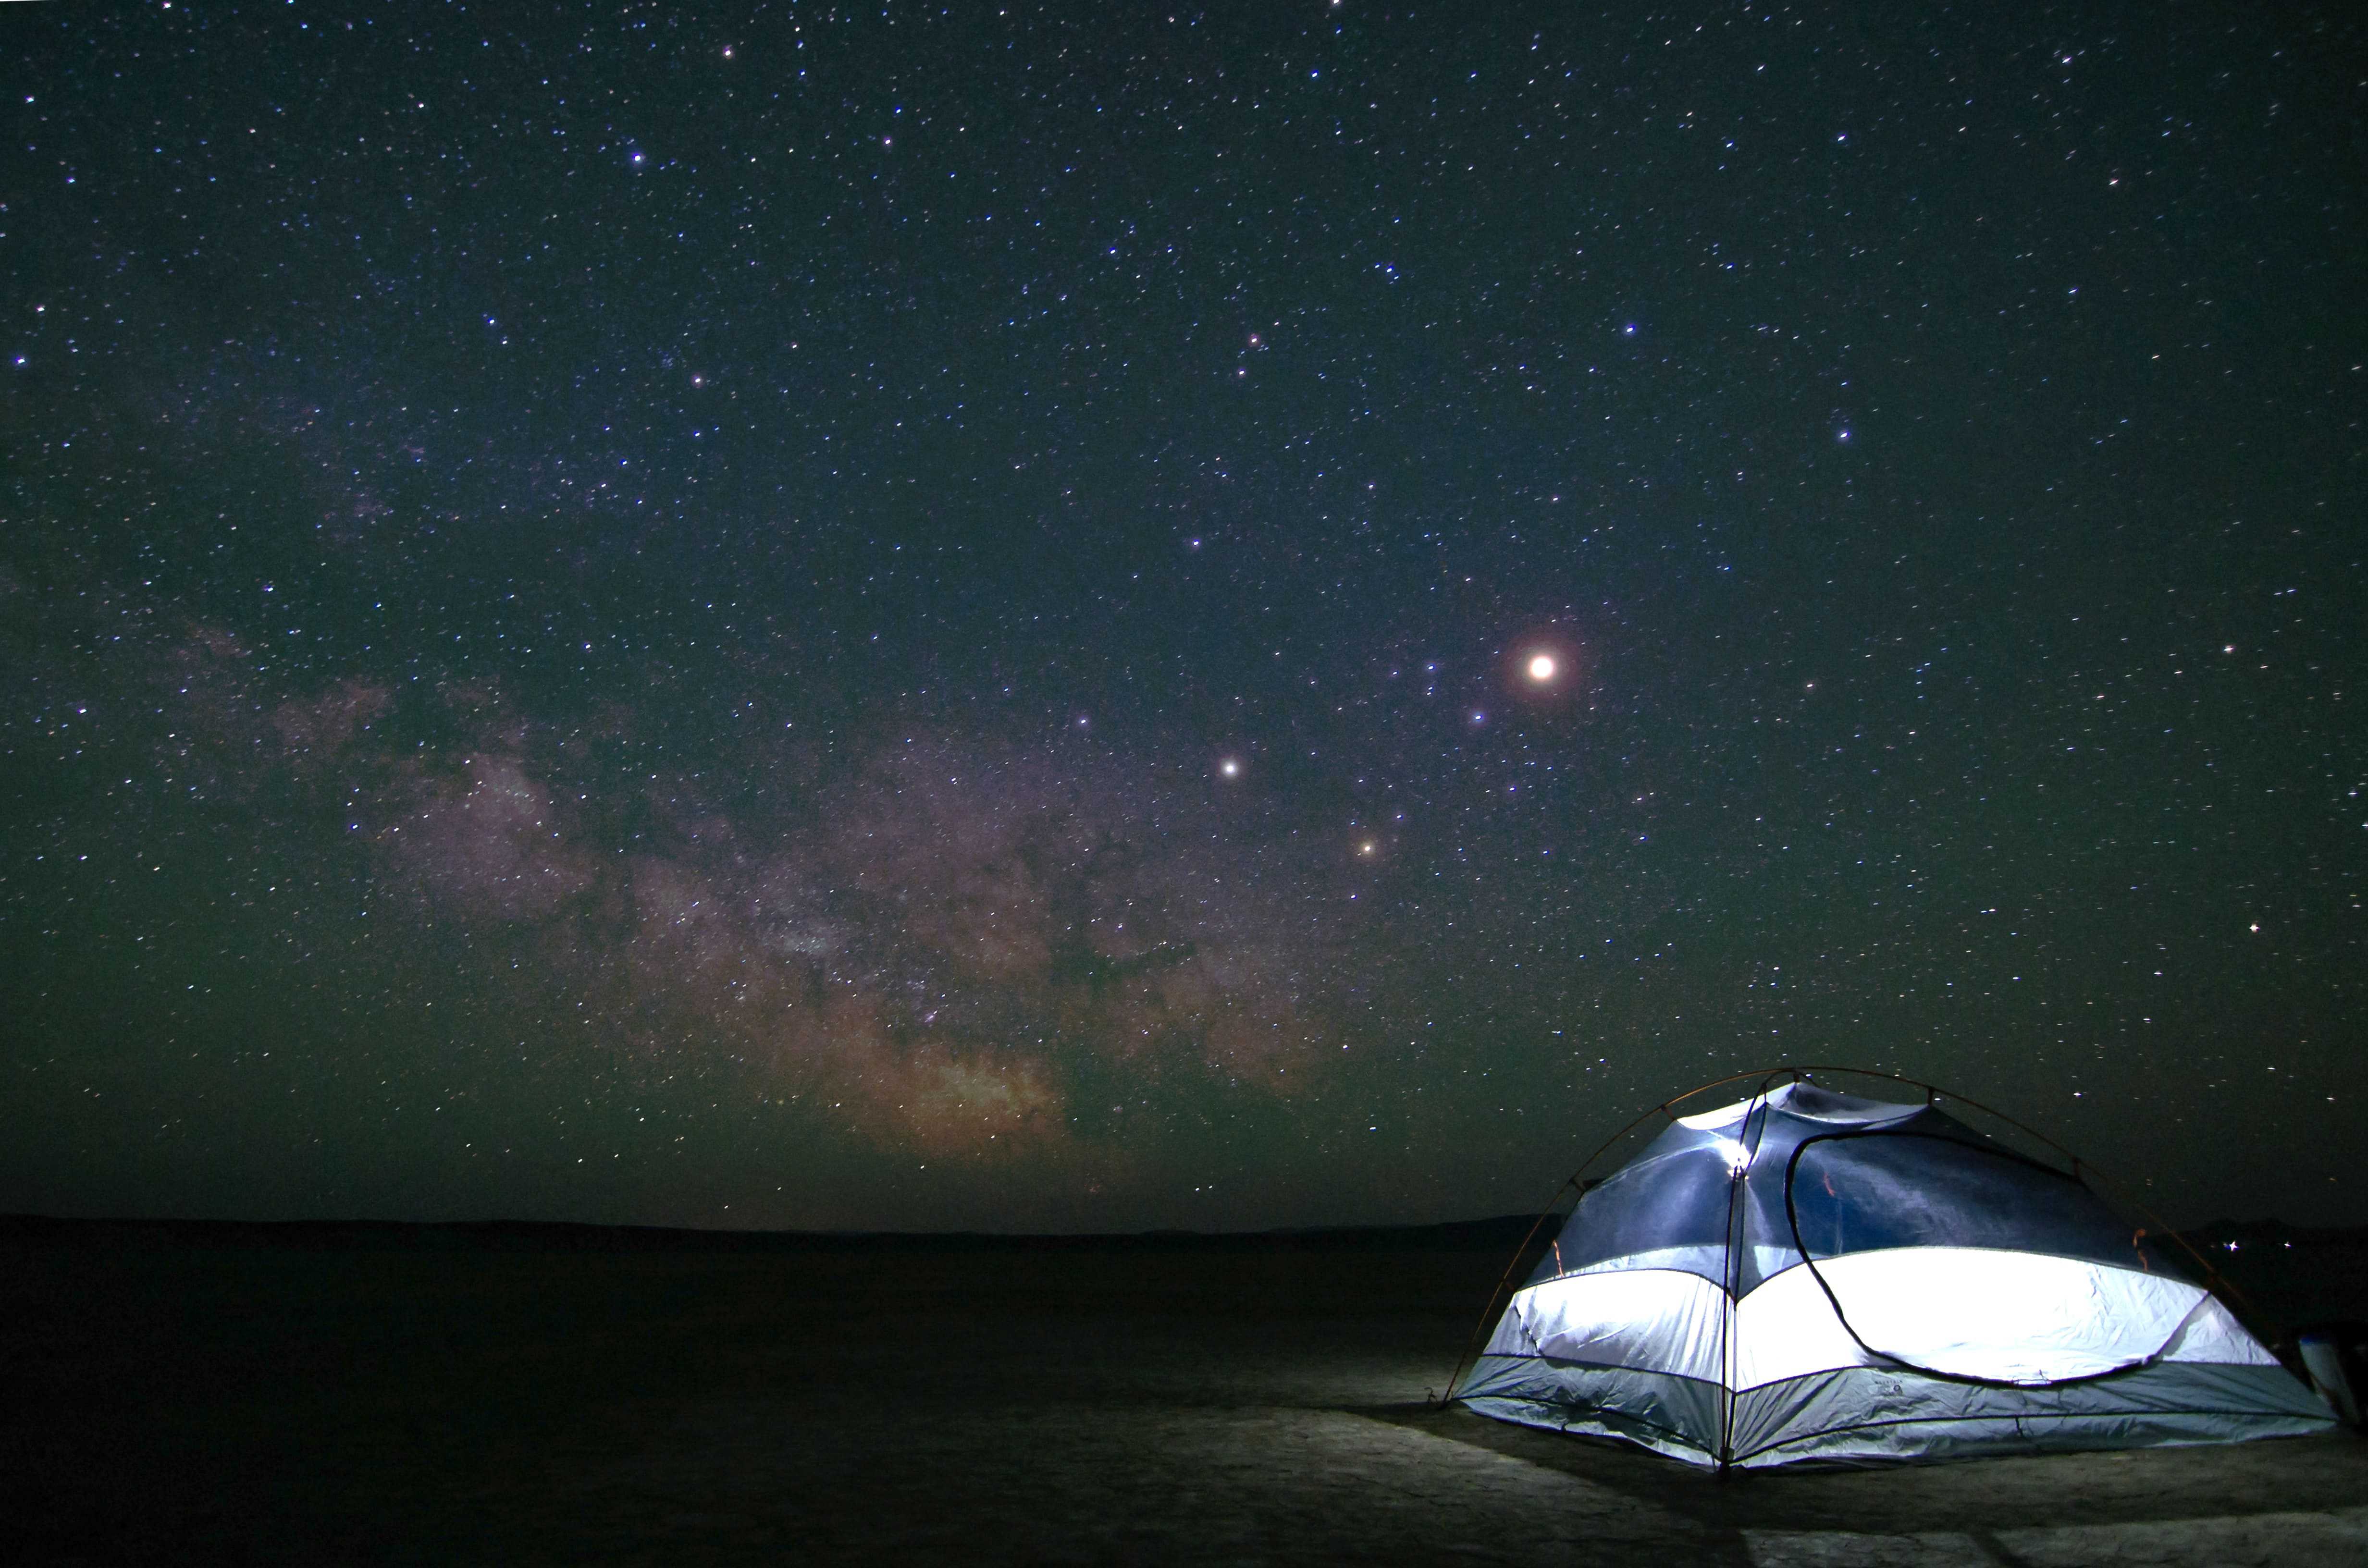 Nighttime view of a camping tent with stars in the background.